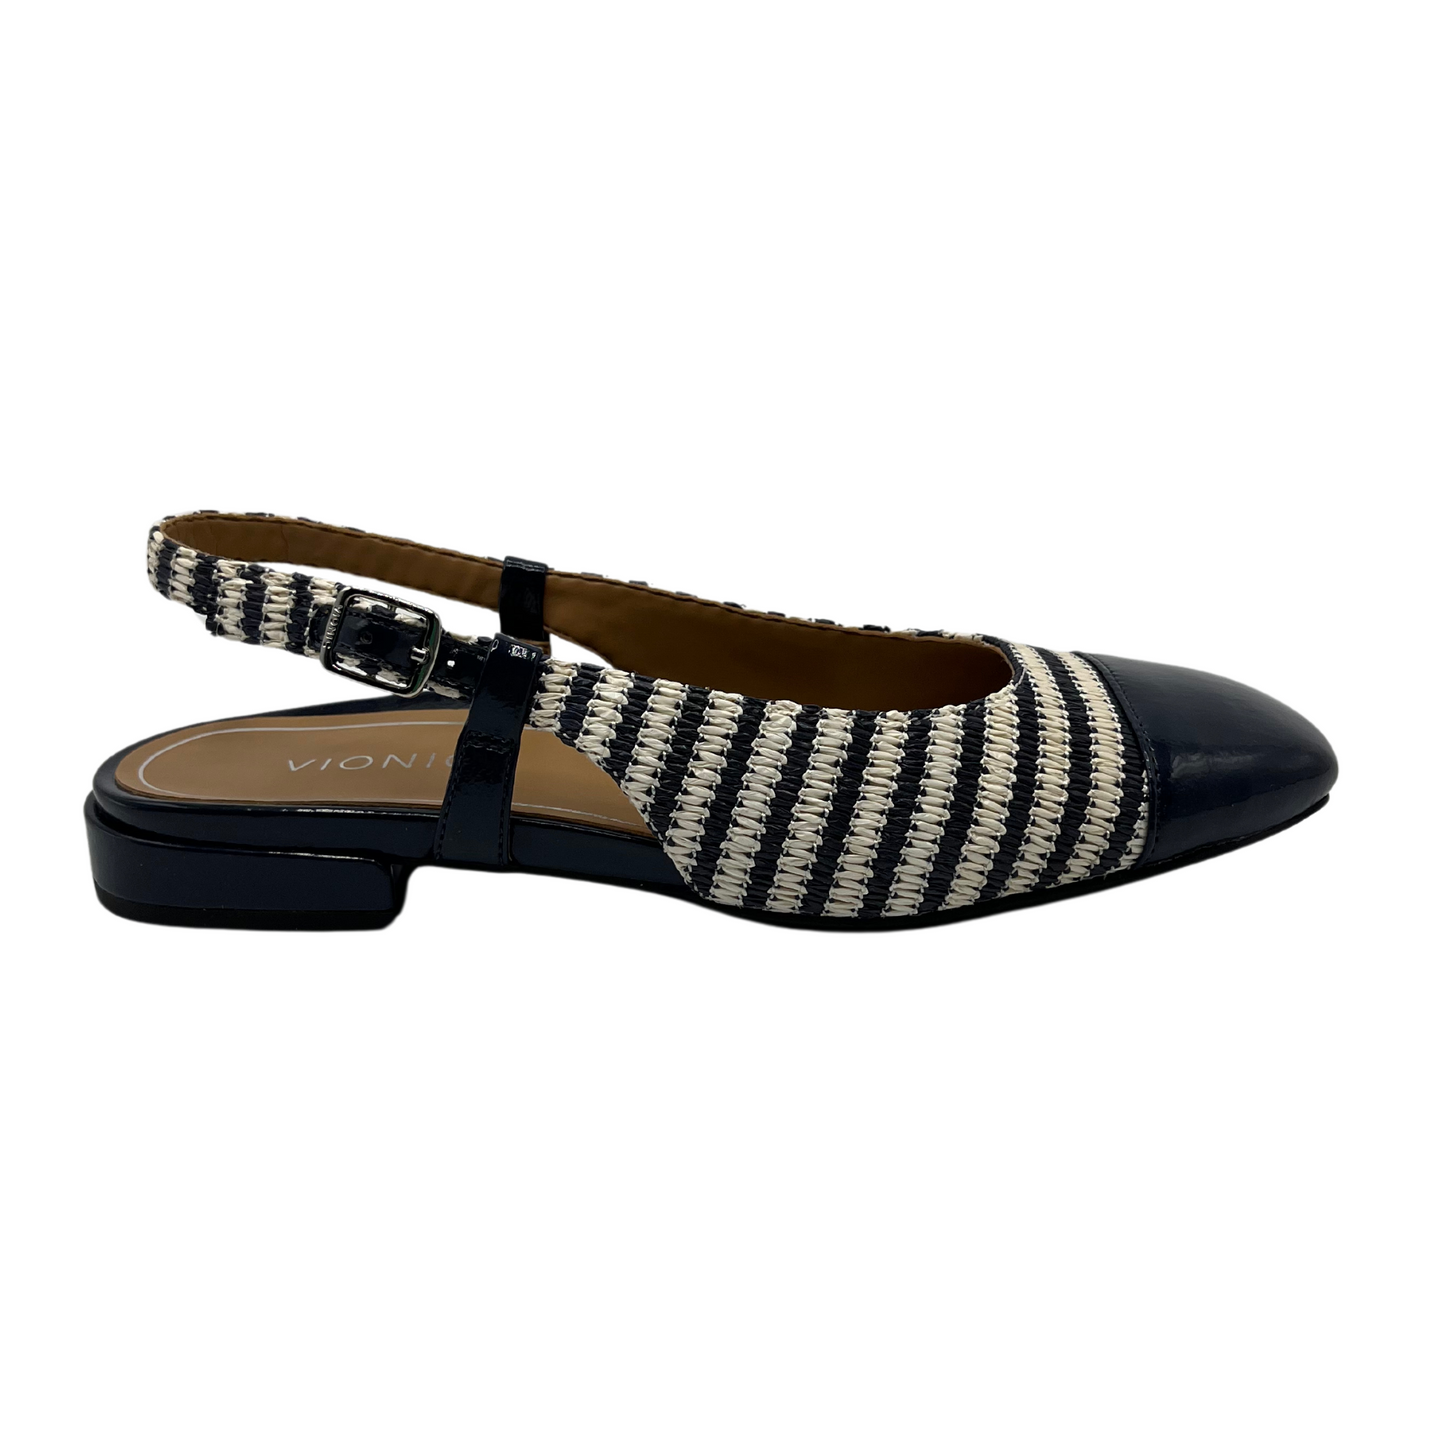 Right facing view of black and white striped slingback flat with squared toe